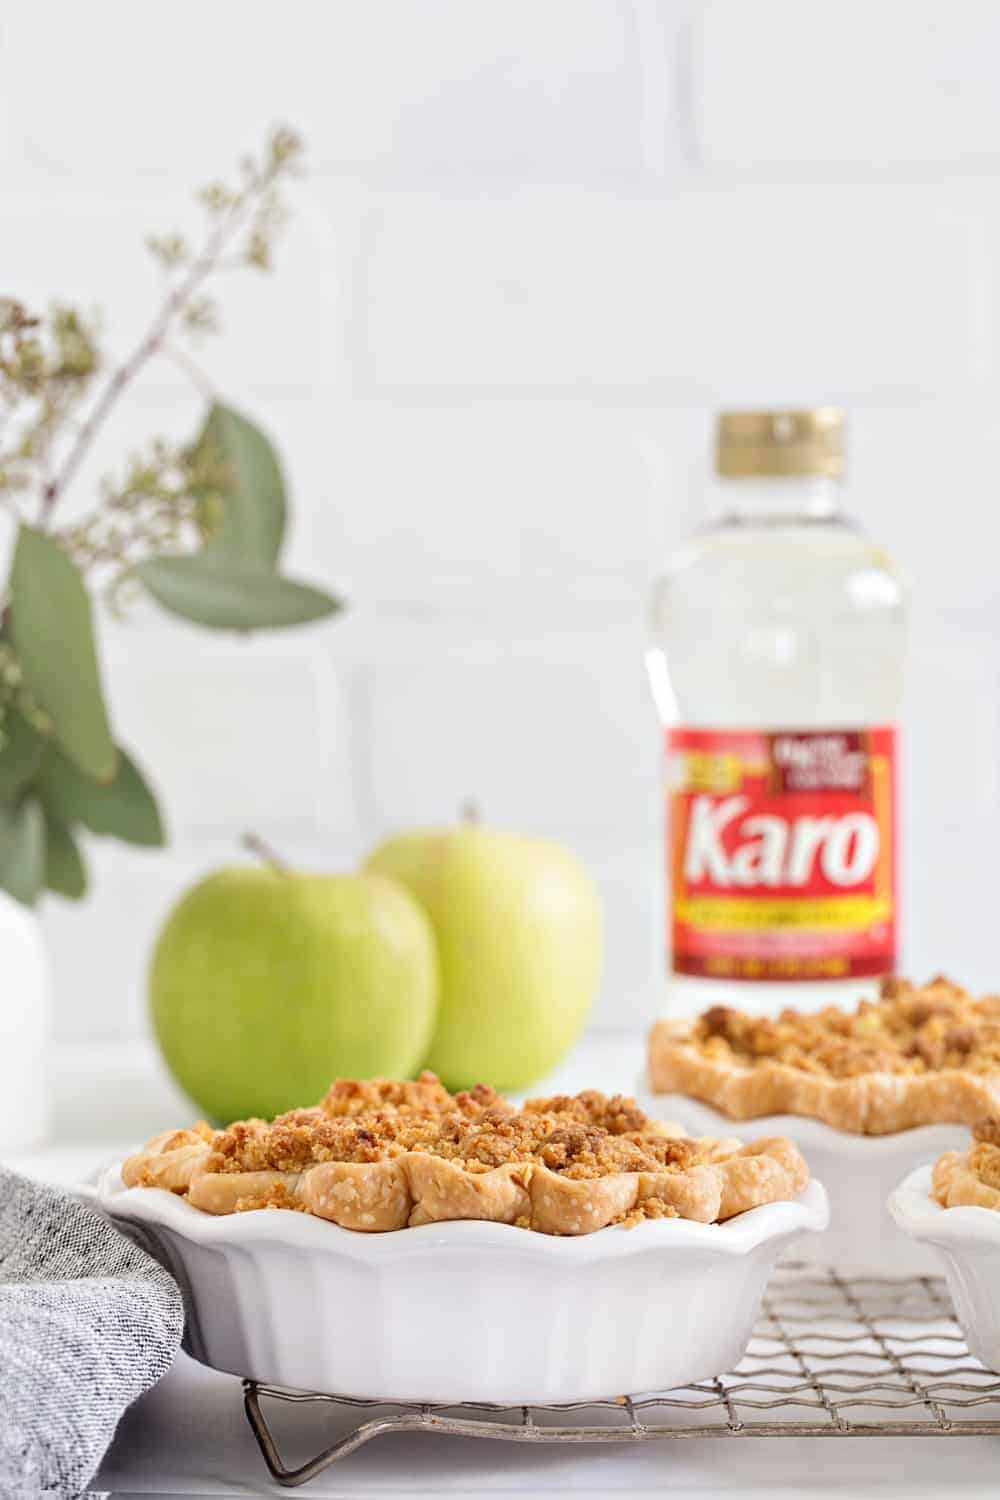 Mini Apple Pies are a fun twist on traditional apple pie. The crumb topping will have your guests begging for more!